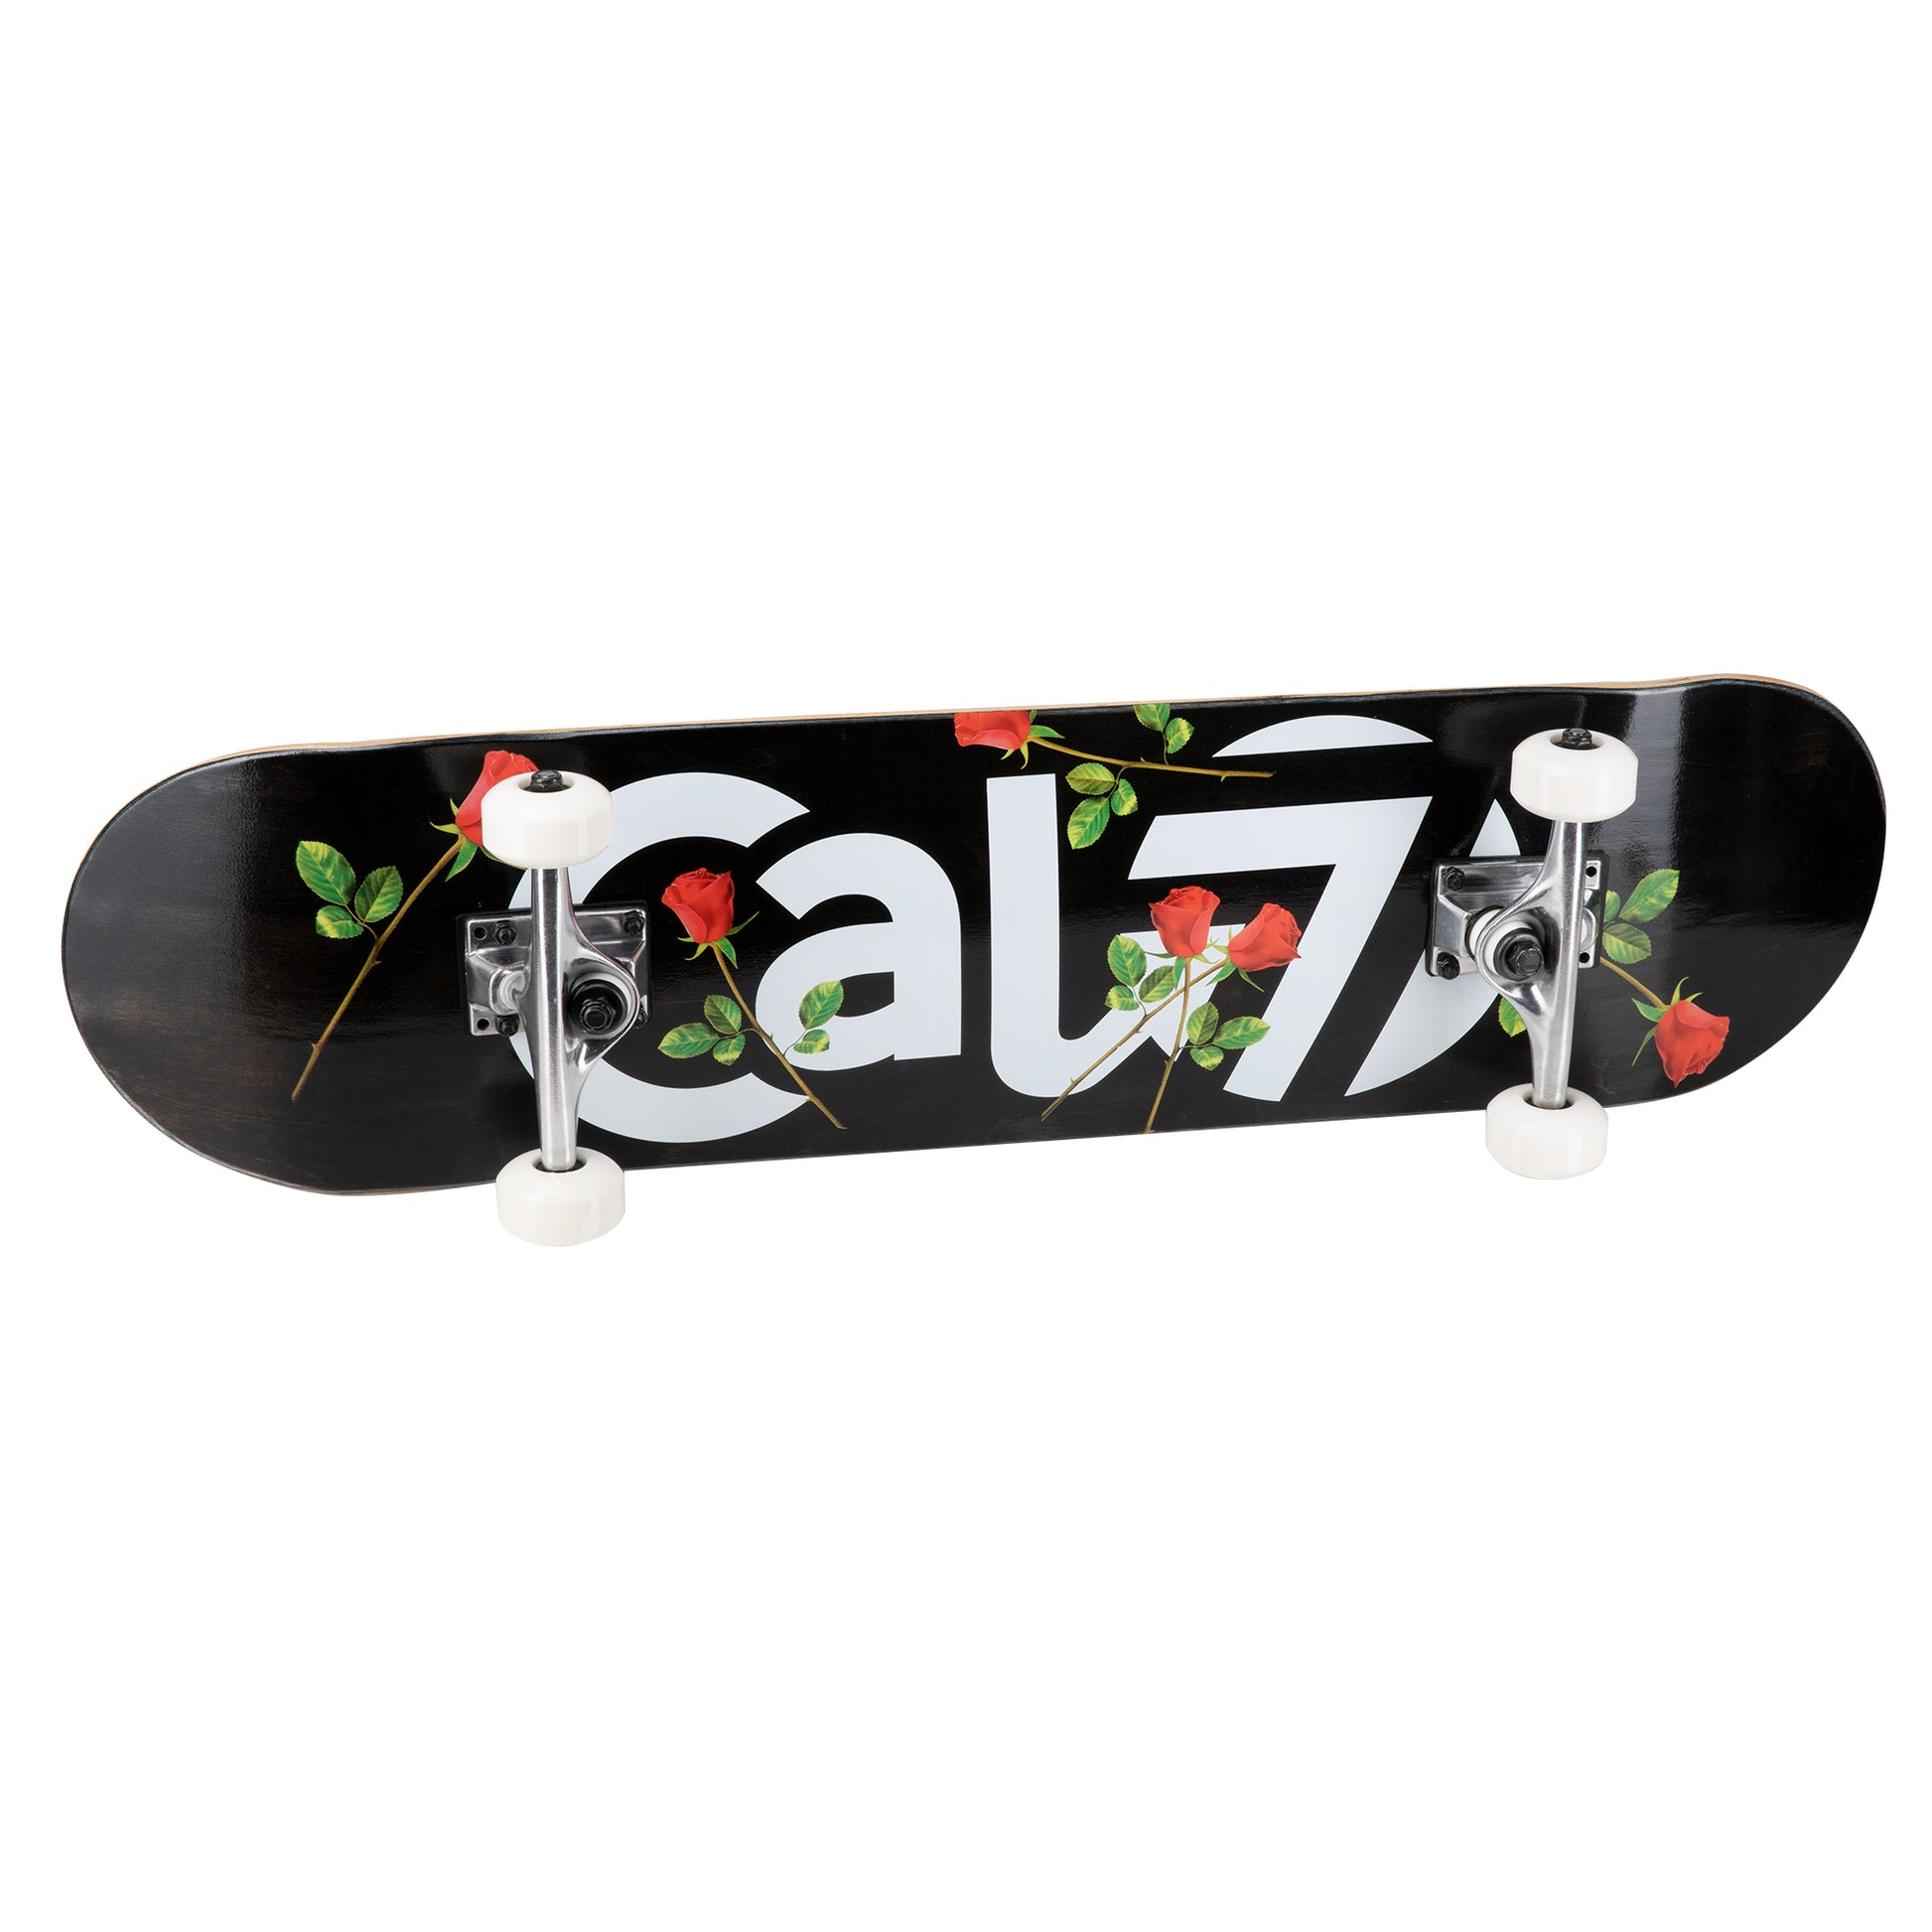 Cal 7 complete 8-inch skateboard with black fallout graphic with red roses